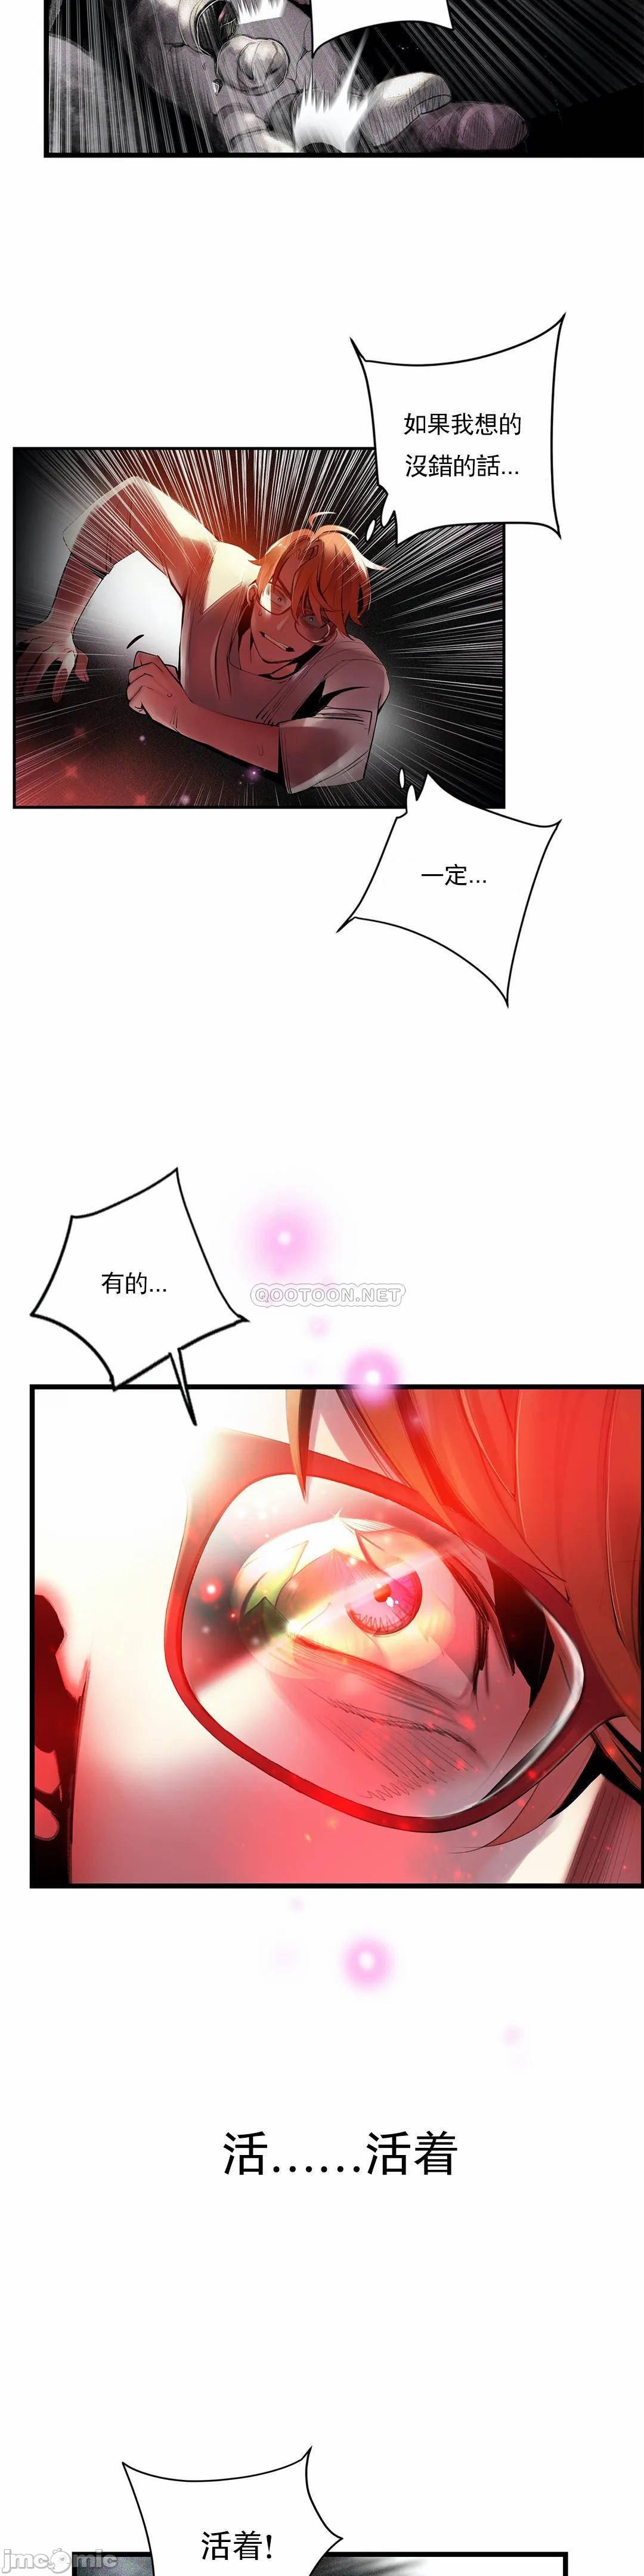 [Juder] Lilith`s Cord (第二季) Ch.77-93 end [Chinese] 478